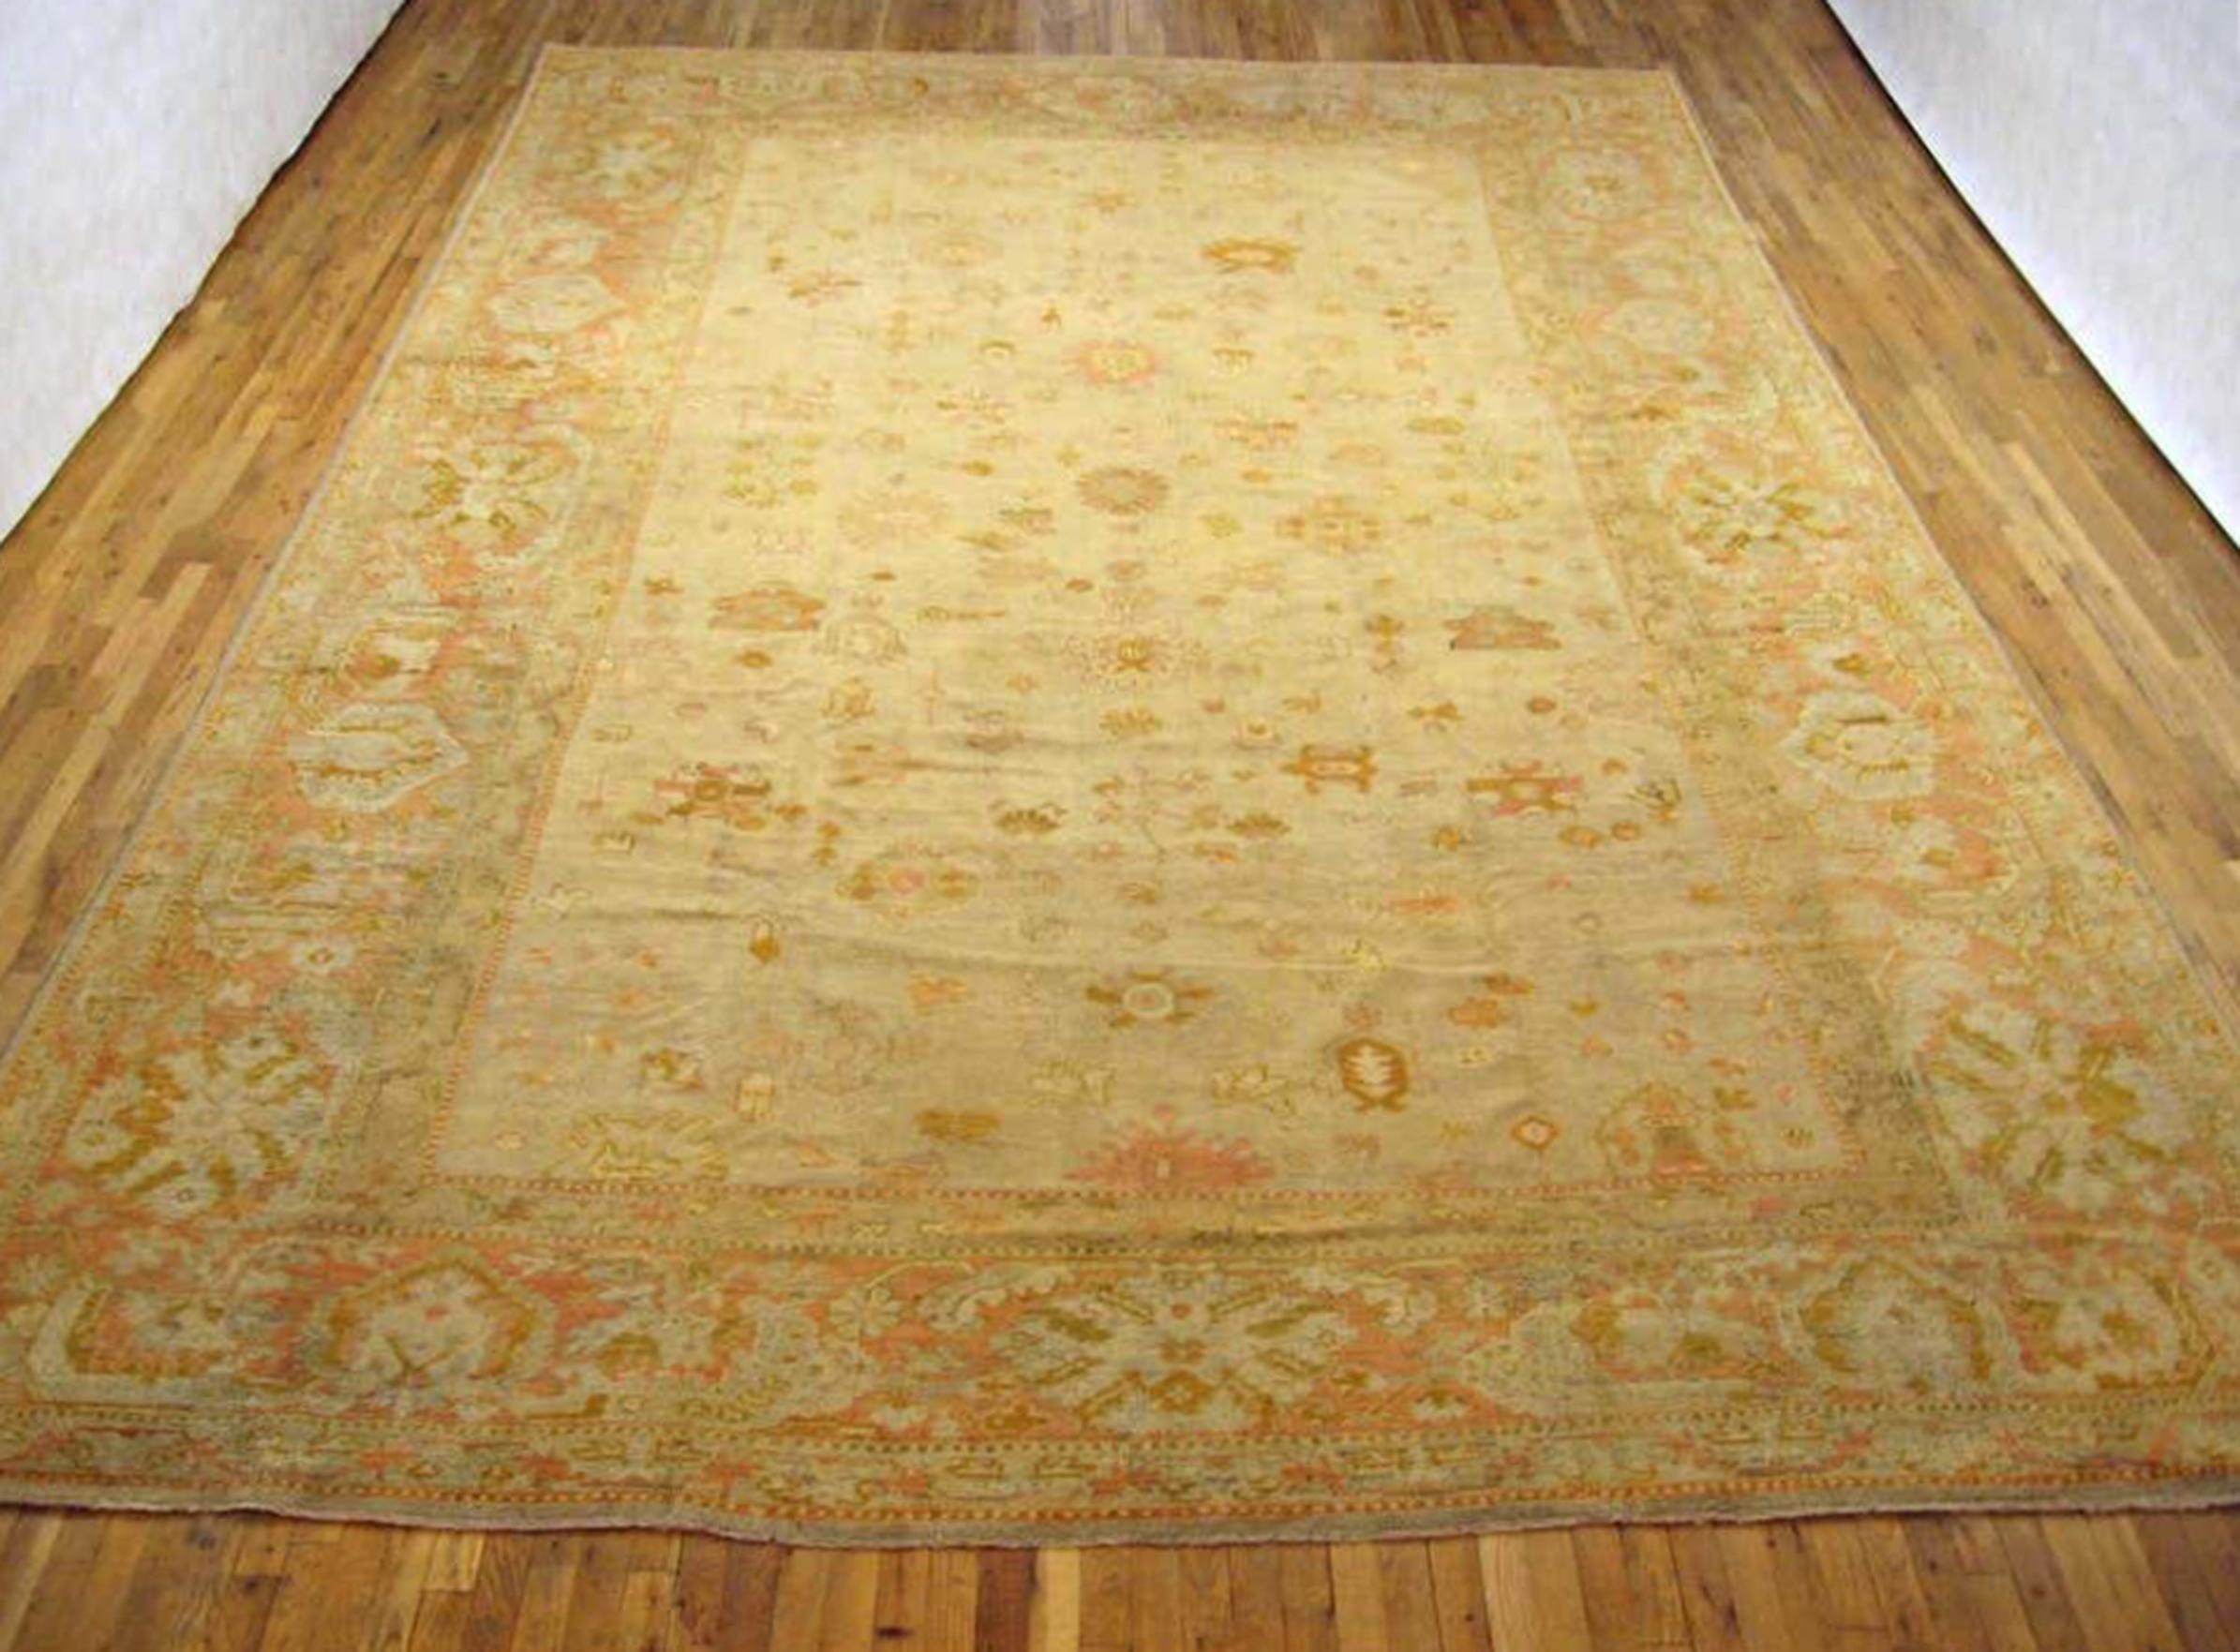 An antique Turkish Oushak carpet, circa 1900. Size: 17' x 11'. This lovely carpet has a variety of floral motifs across the softly hued central field. Enclosed within a festive border that gives this informal carpet even more of a sense of whimsy